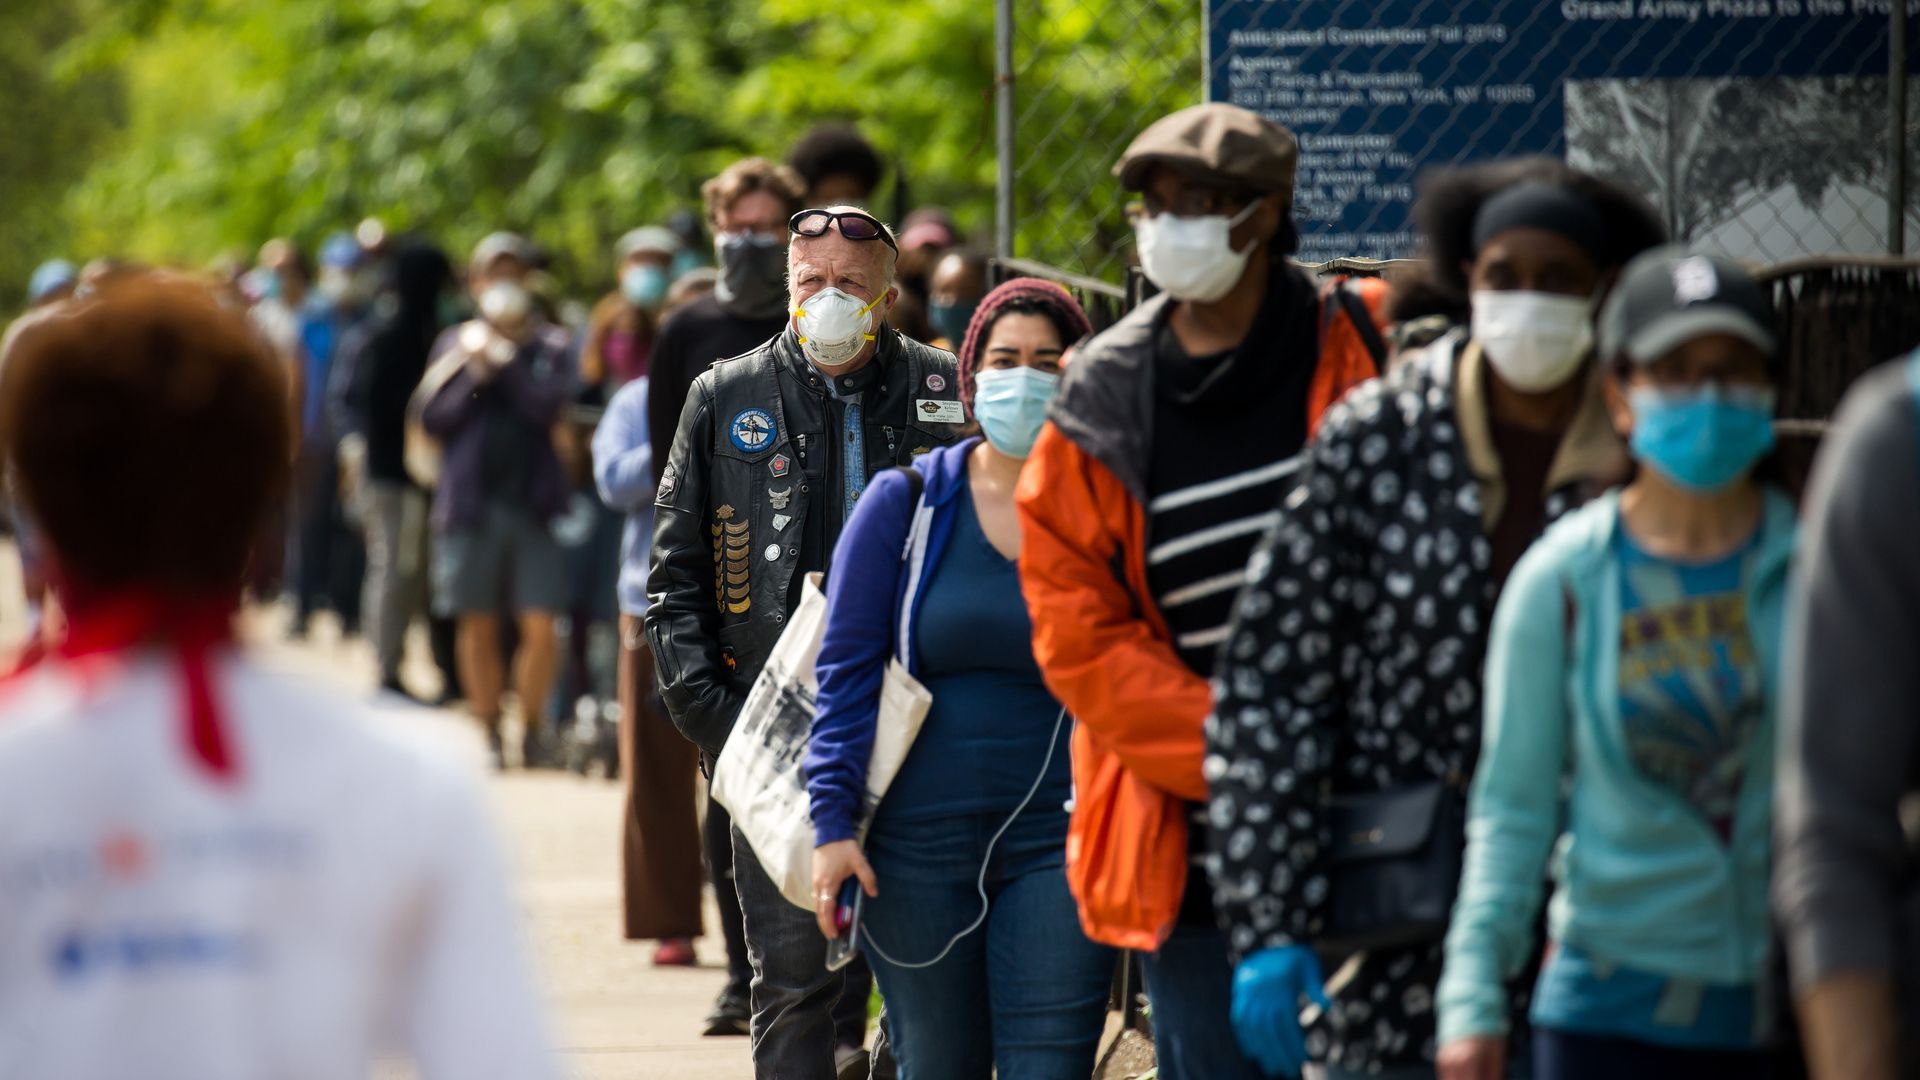 People wait in line for free masks in New York City.